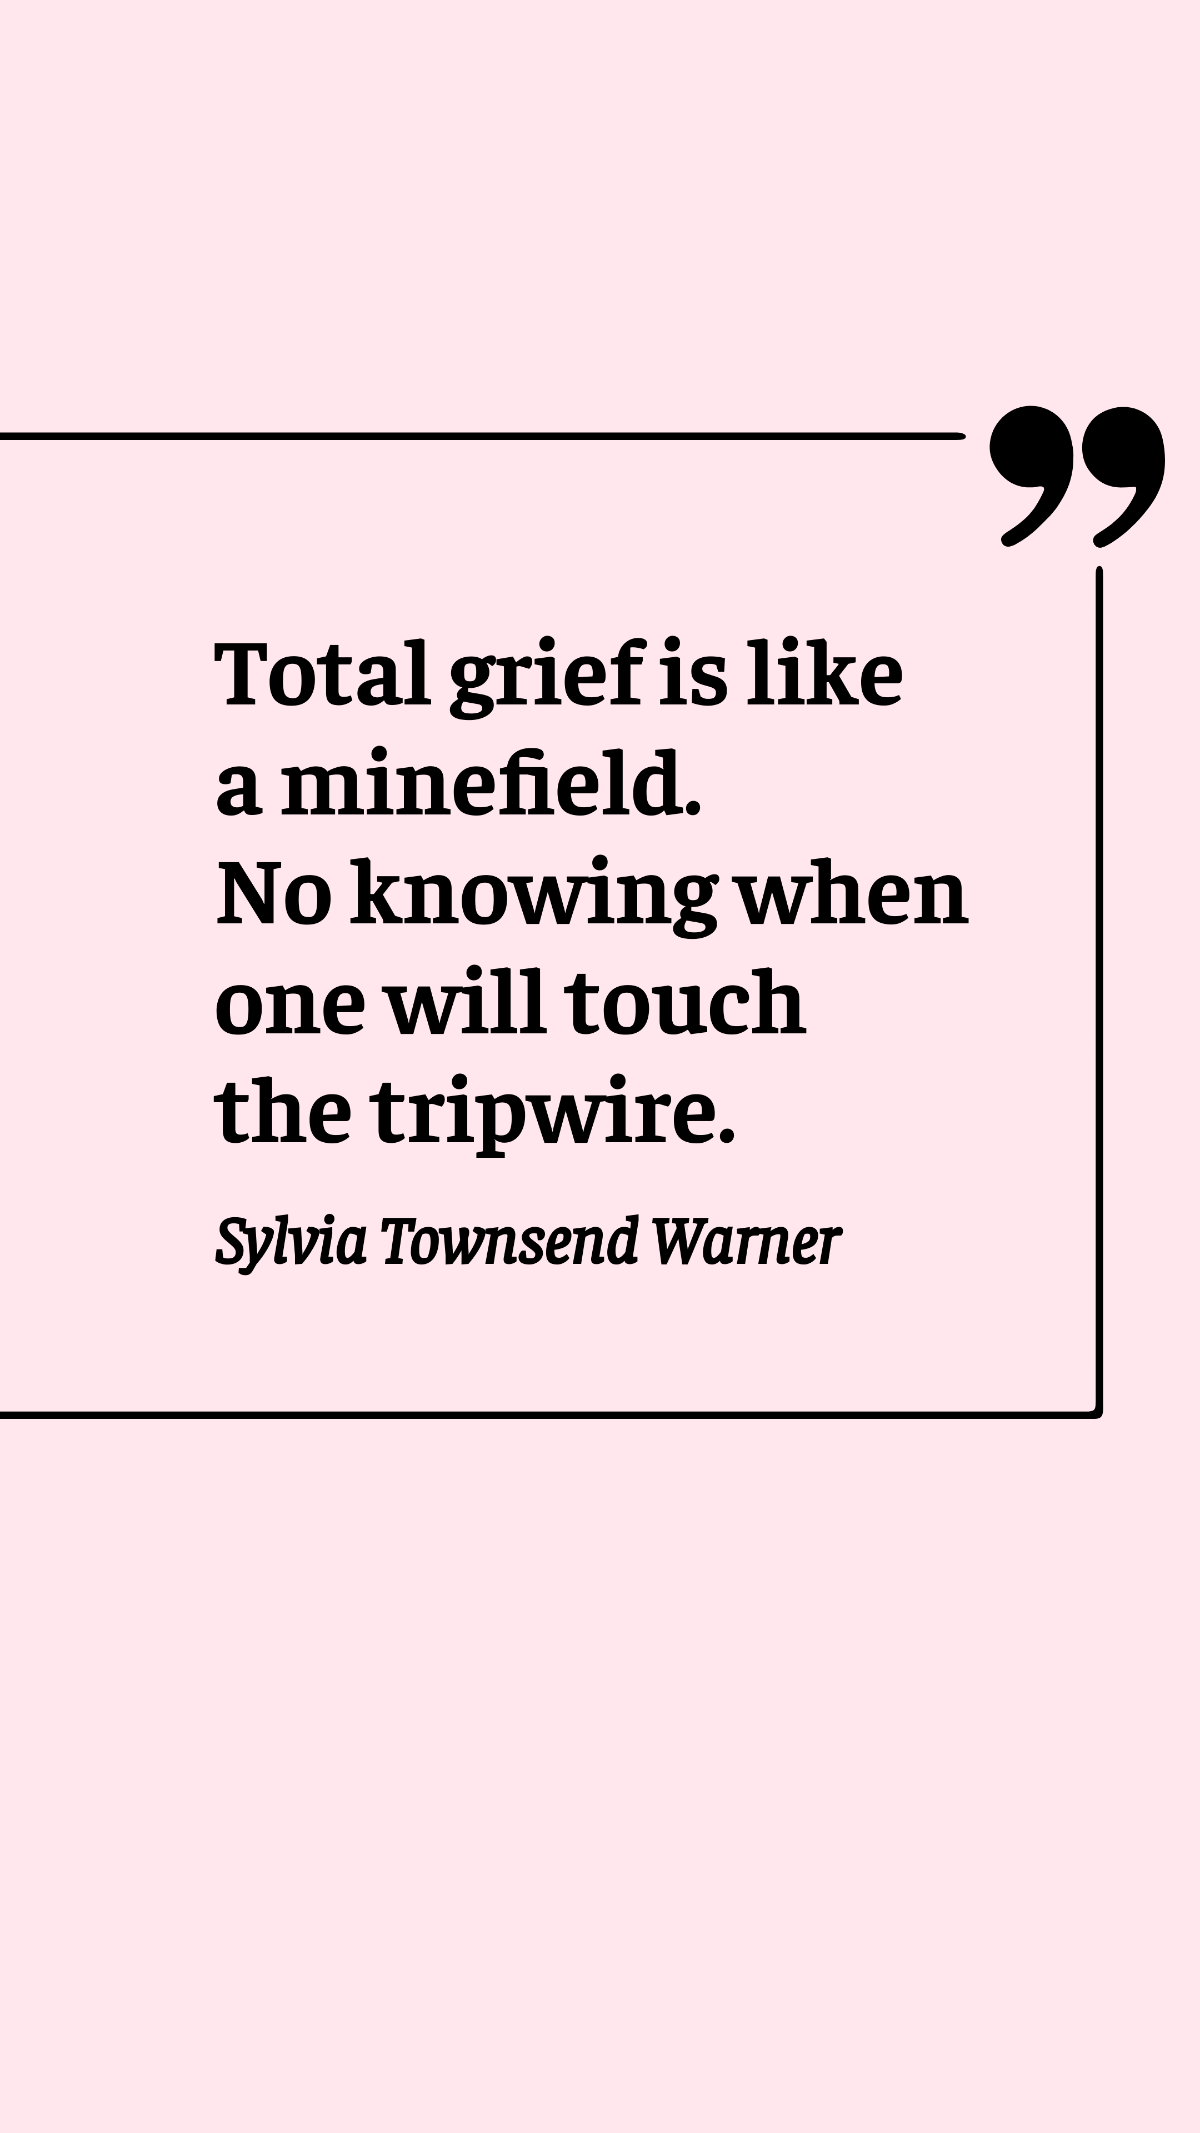 Free Sylvia Townsend Warner - Total grief is like a minefield. No knowing when one will touch the tripwire. Template